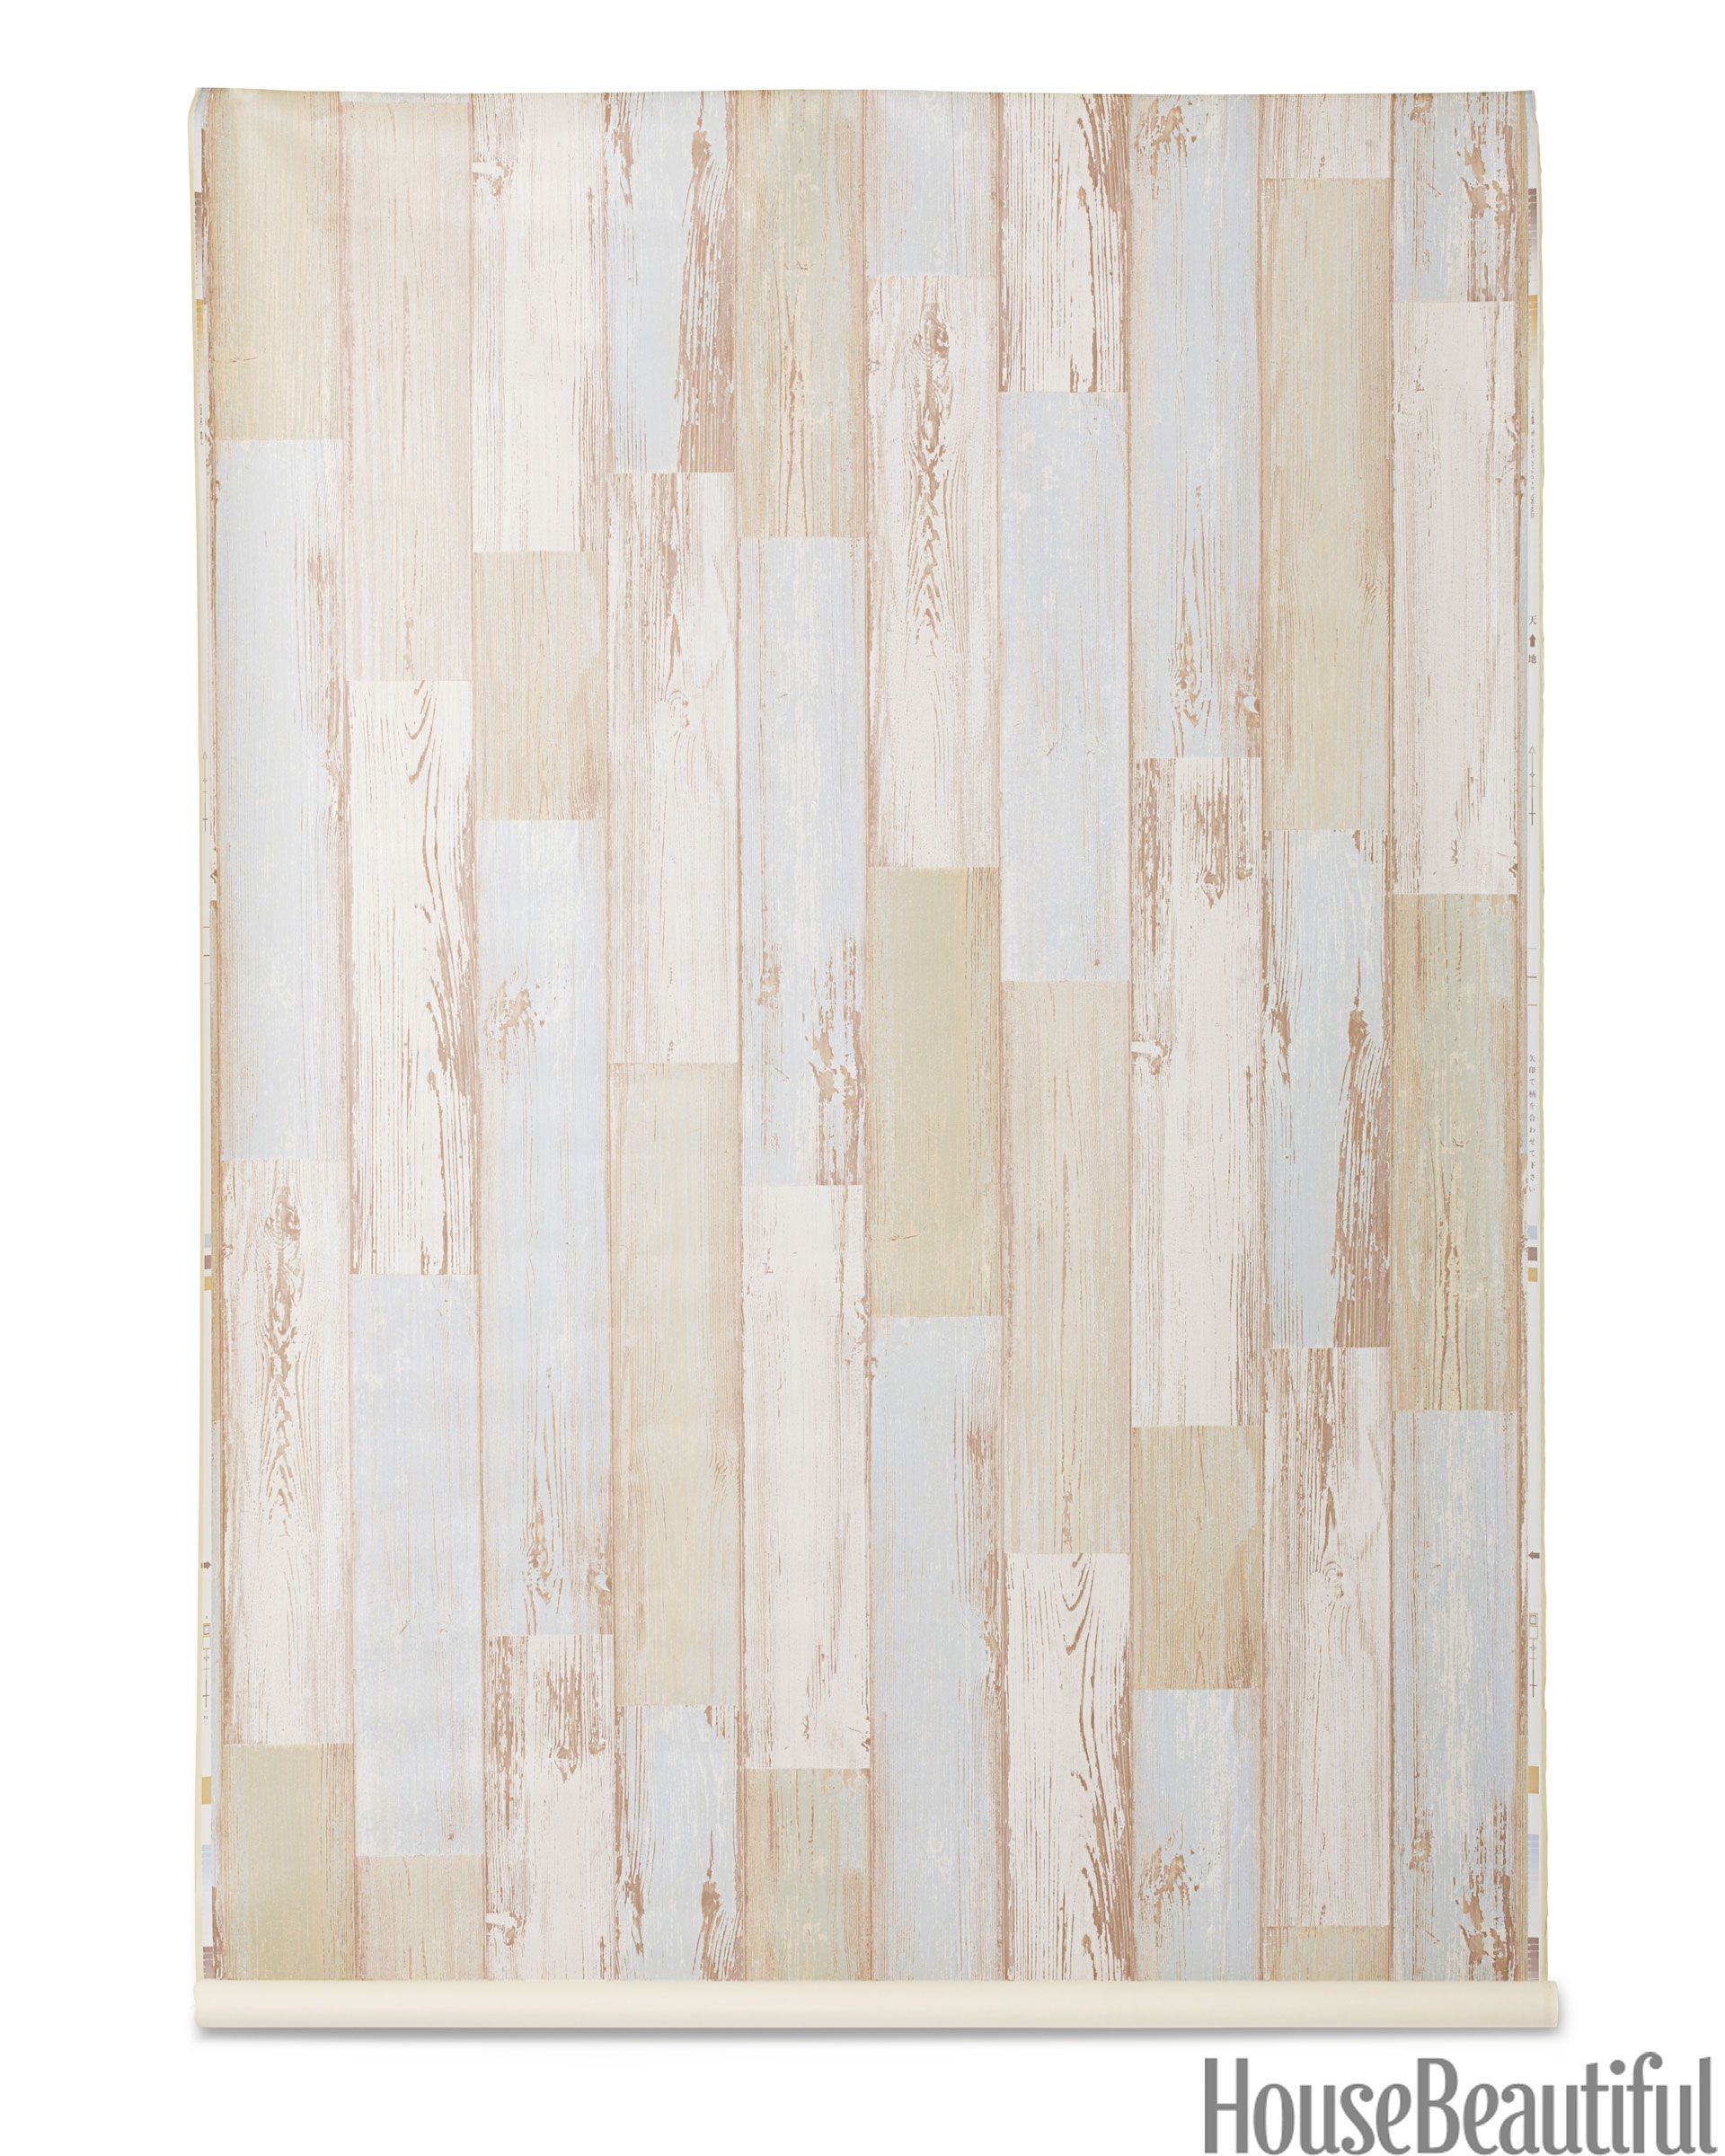 Distressed Wood Wallpaper Peel and Stick Wallpaper 1771 x 4725 Faux Wood  Plank Wallpaper Self Adhesive Removable Reclaimed Wood Look Wallpaper Wall  Decorative Vinyl Film Shelf Cover Thicker  Amazonin Home Improvement